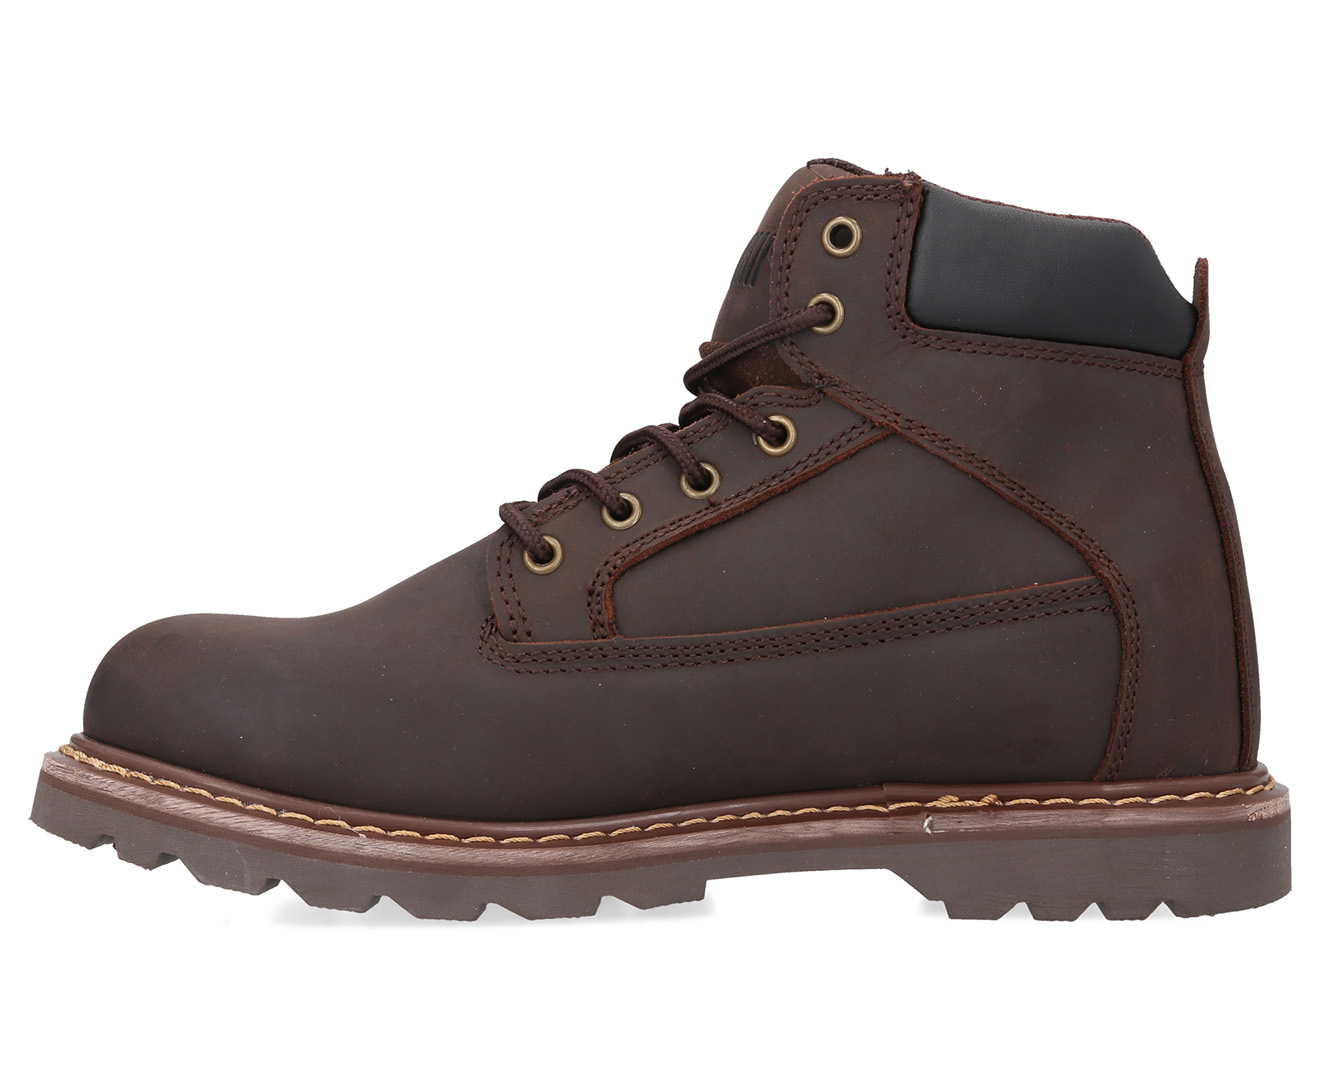 ventoy legacy boot